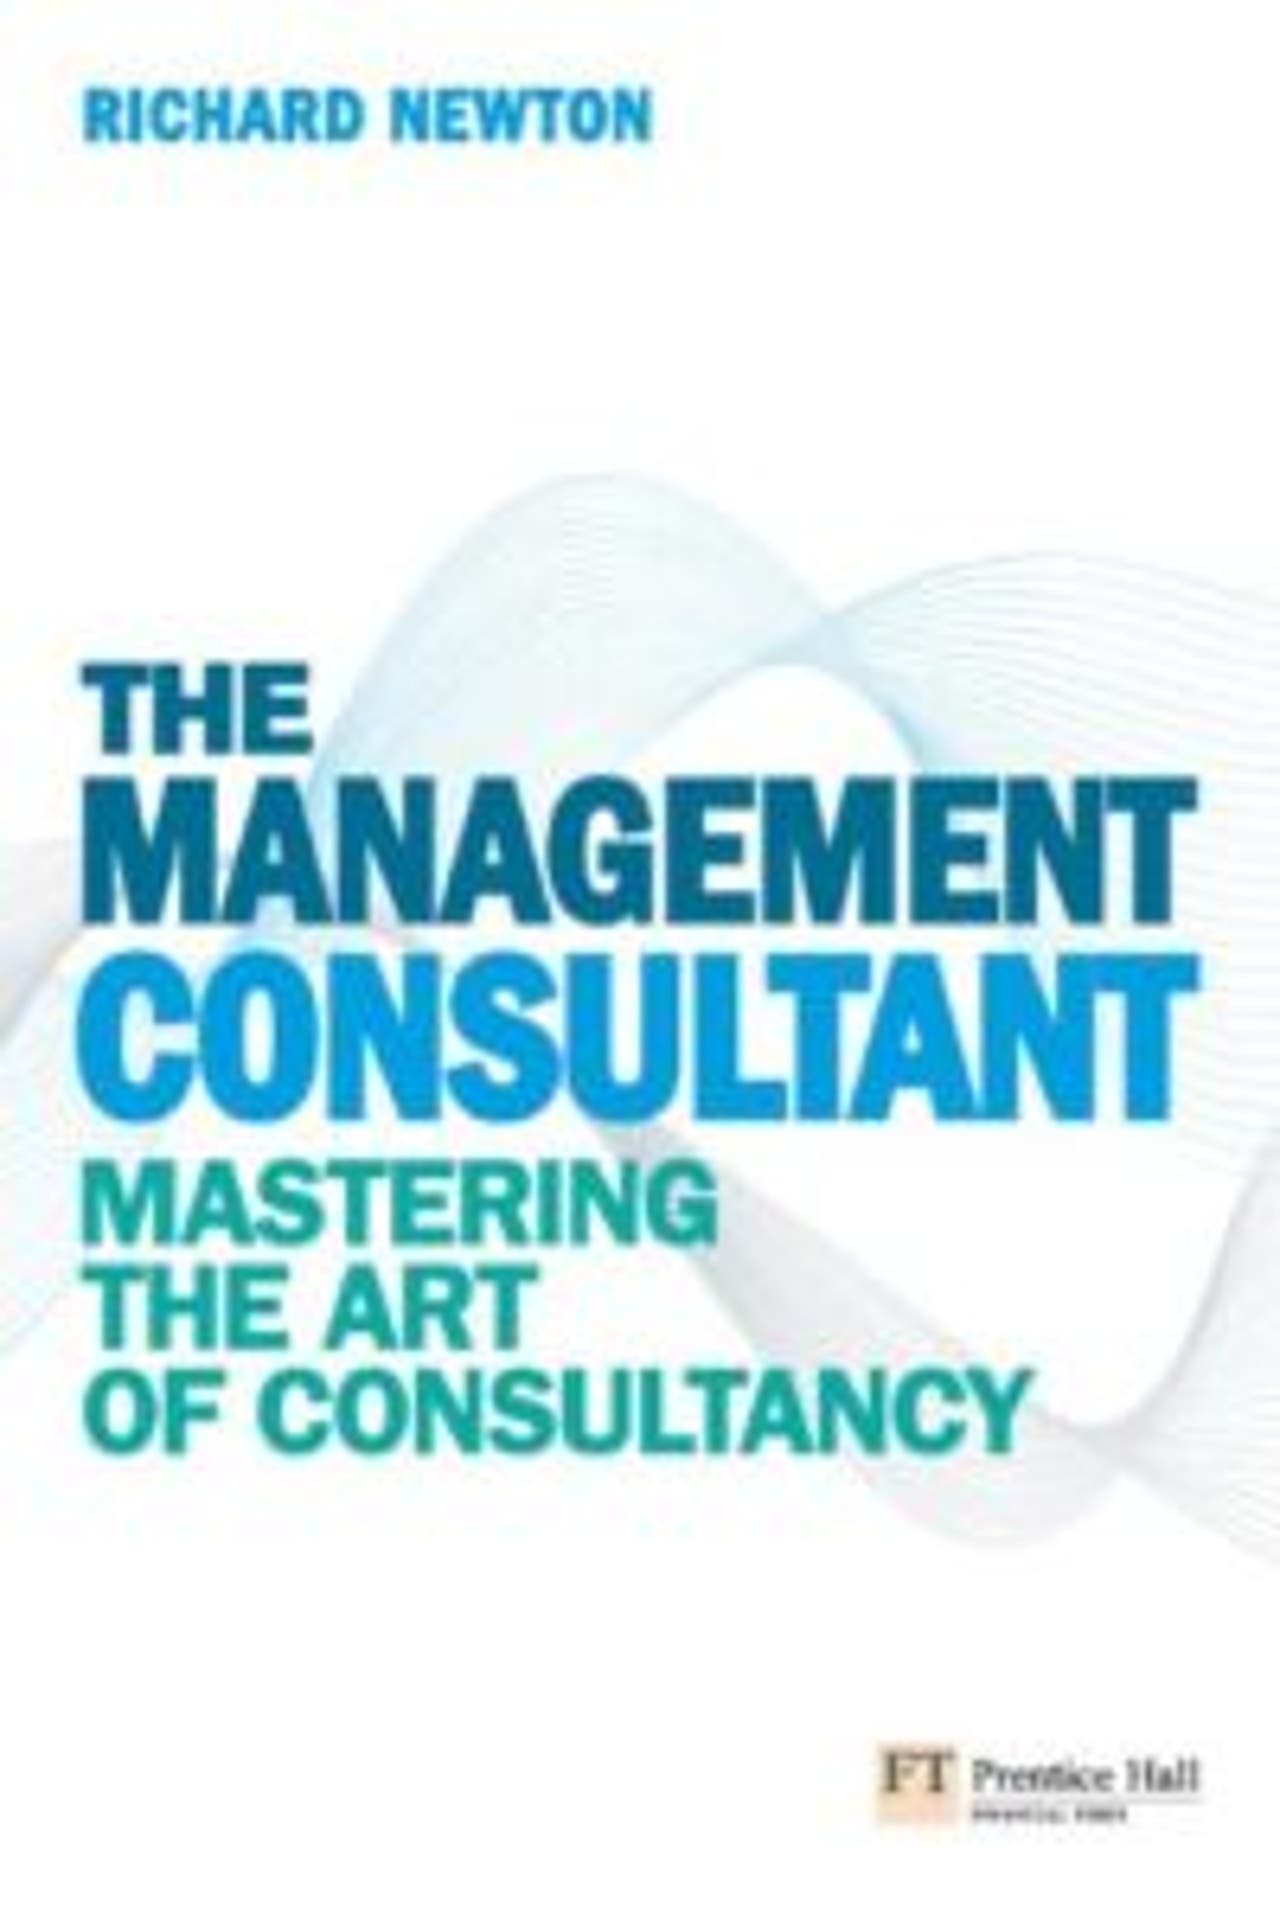 The Management Consultant by Richard Newton